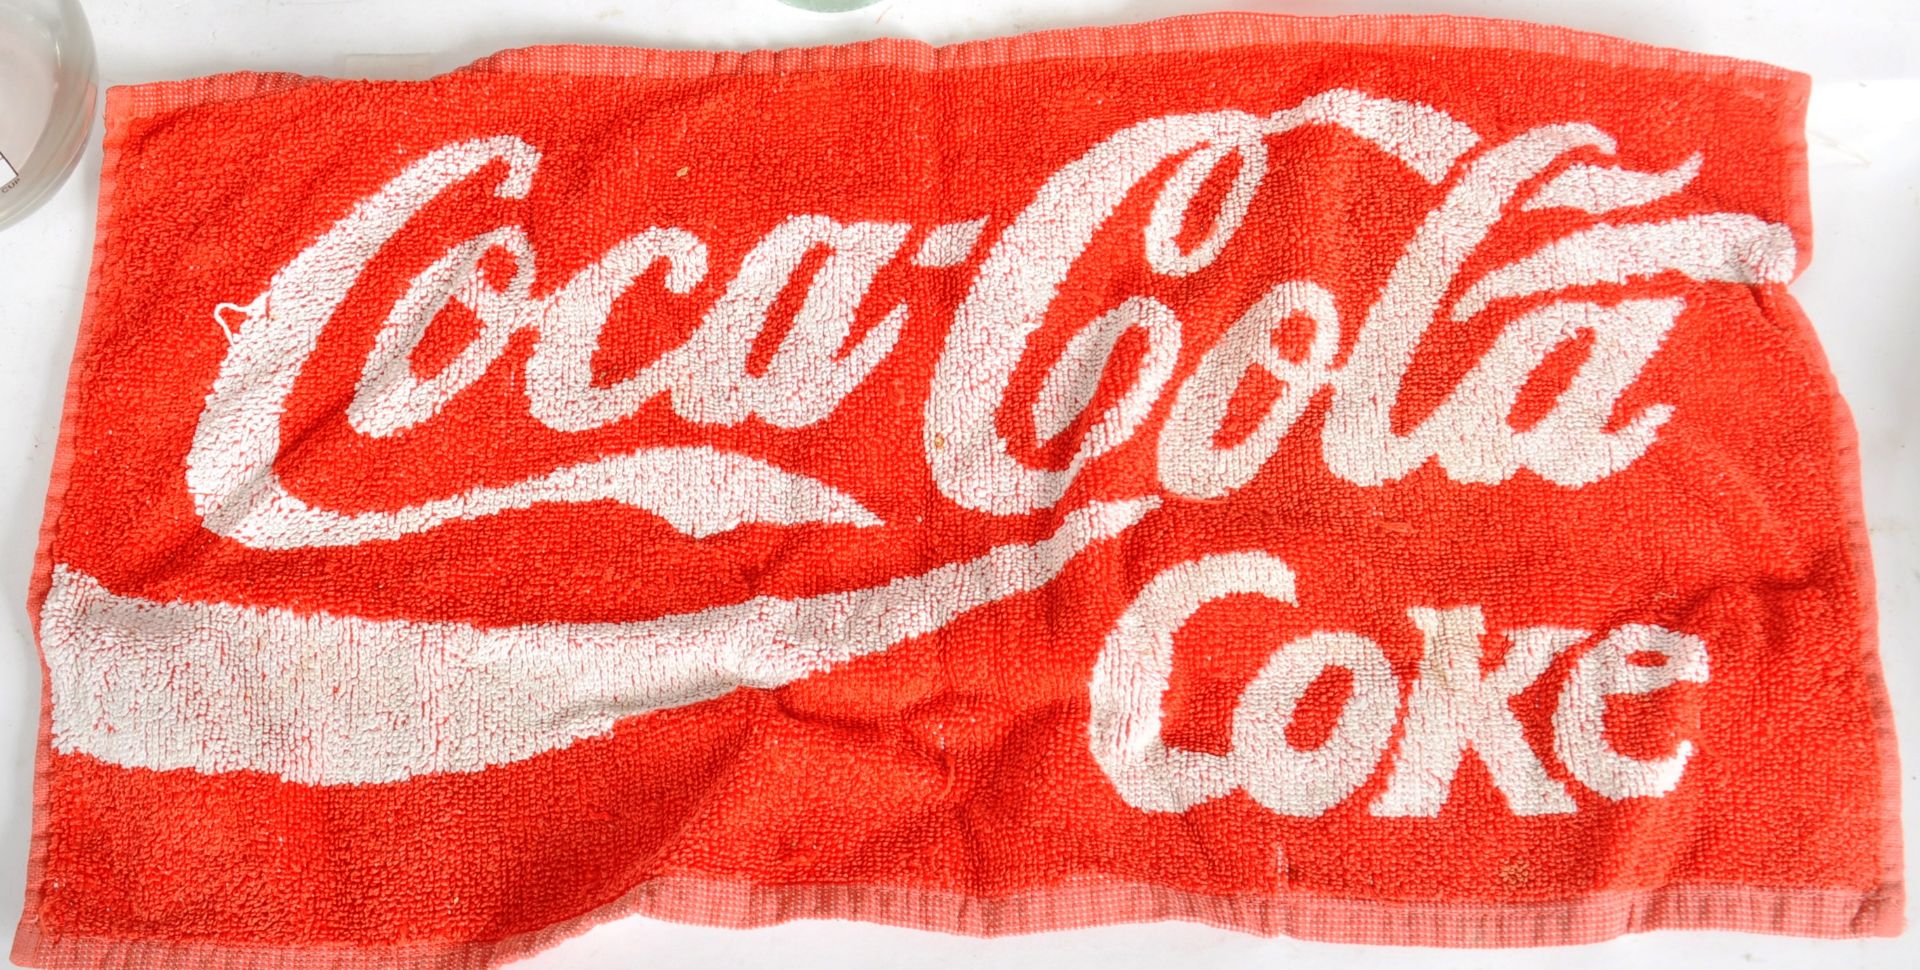 COCA COLA - SELECTION OF VINTAGE MERCHANDISE & ADVERTISING - Image 3 of 20